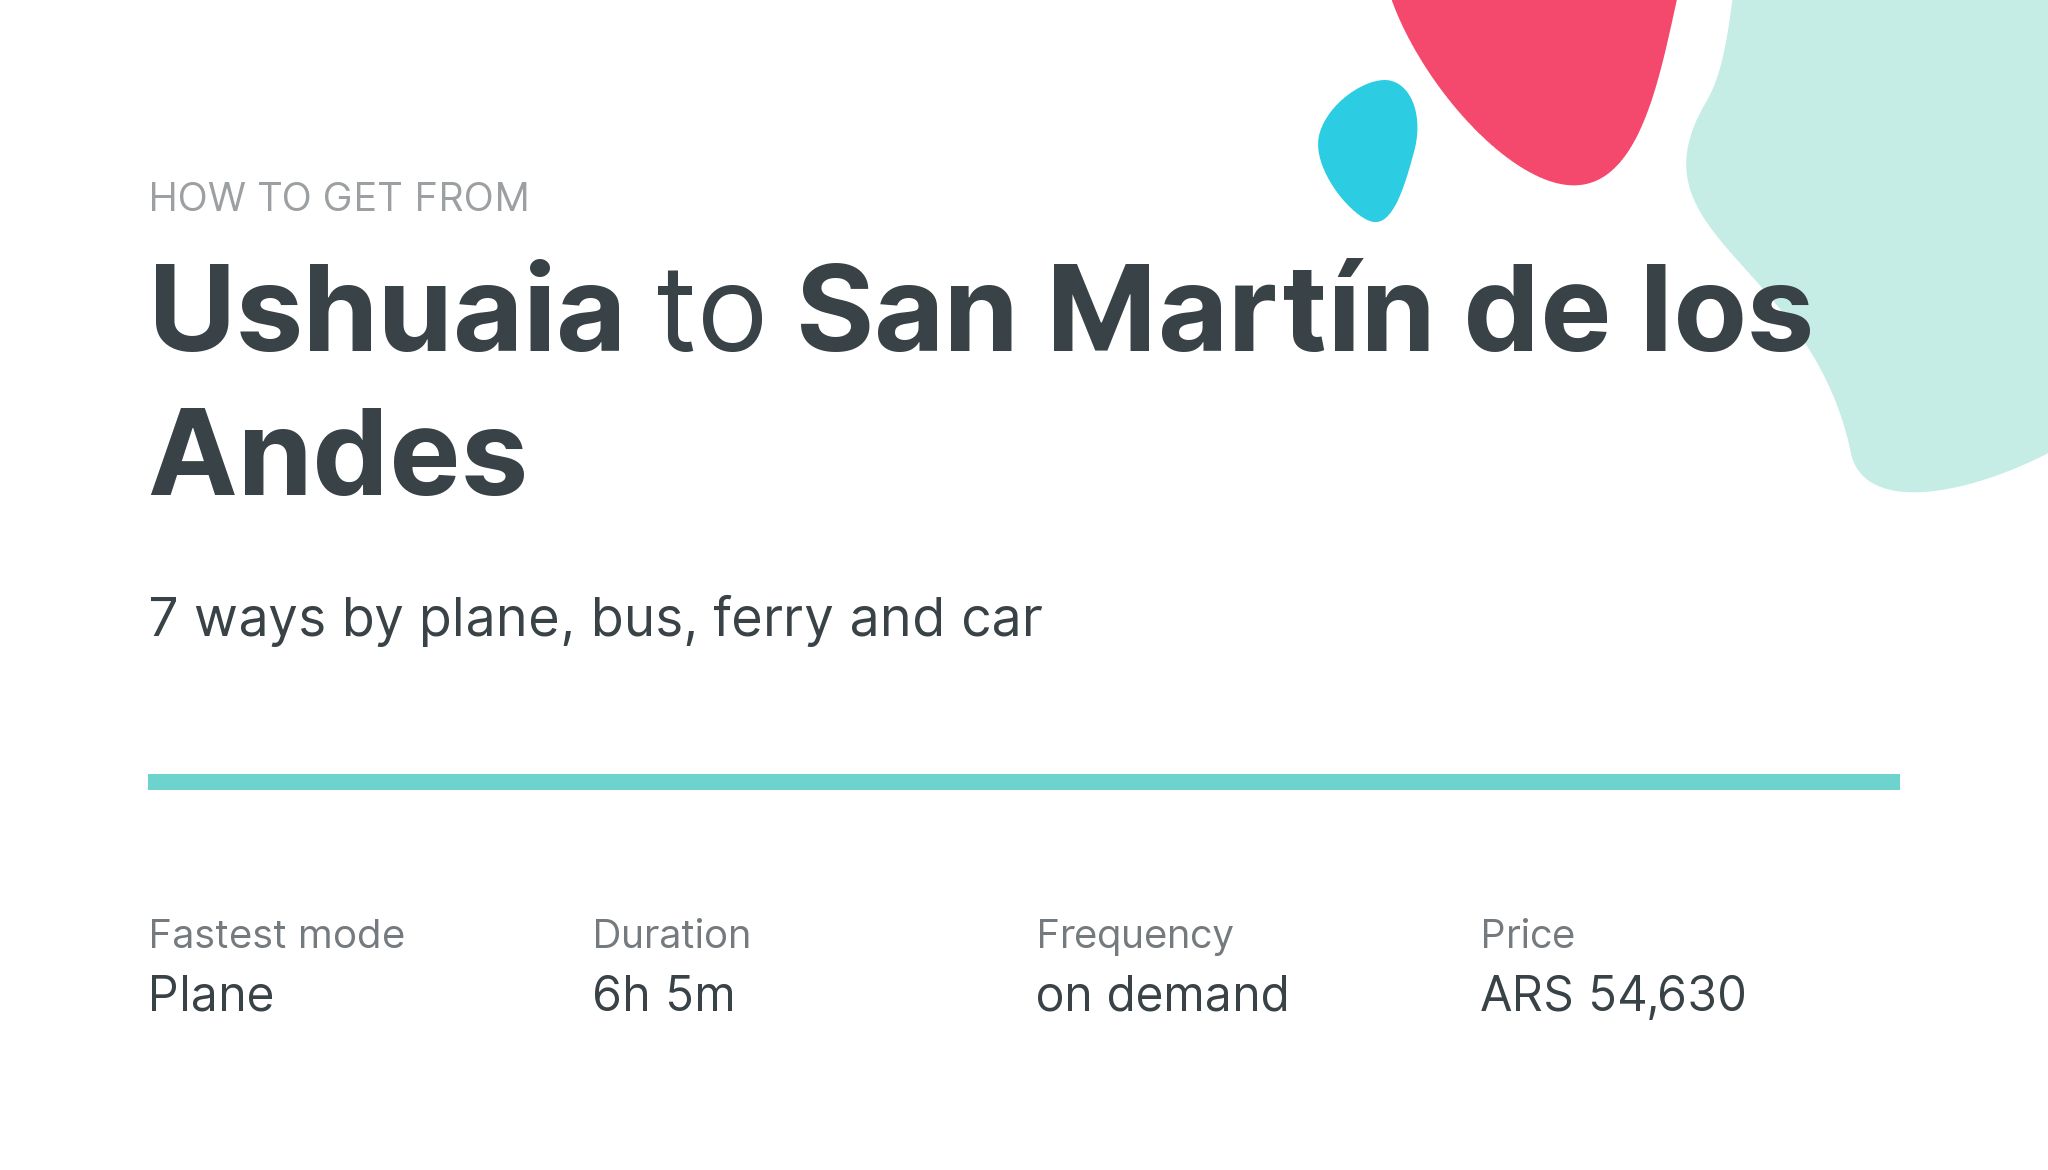 How do I get from Ushuaia to San Martín de los Andes